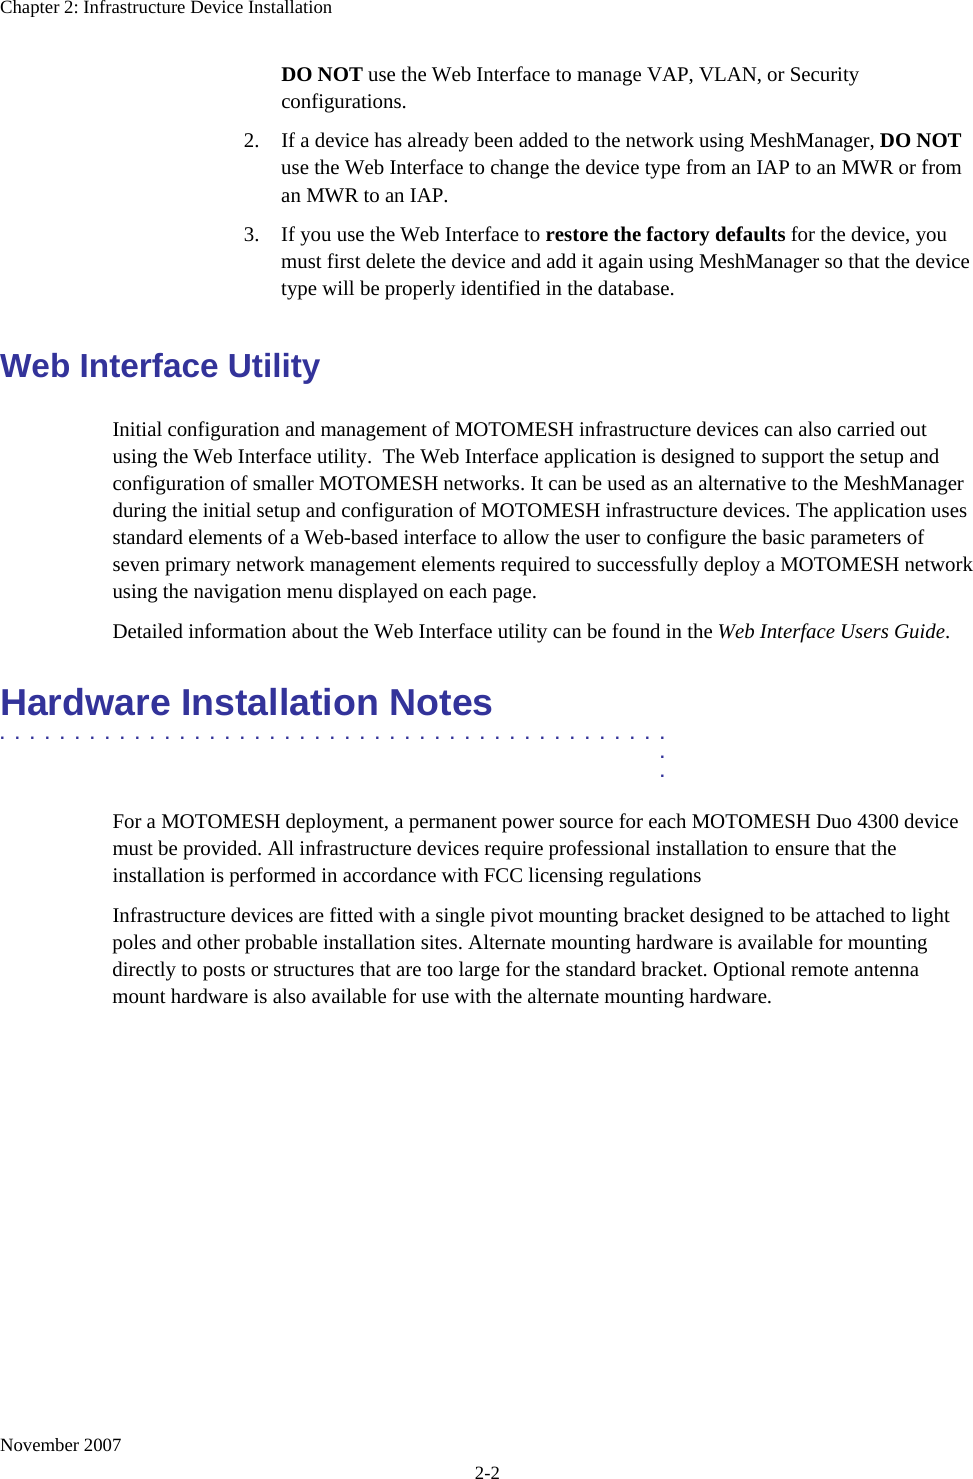 Chapter 2: Infrastructure Device Installation November 2007 2-2 DO NOT use the Web Interface to manage VAP, VLAN, or Security configurations. 2. If a device has already been added to the network using MeshManager, DO NOT use the Web Interface to change the device type from an IAP to an MWR or from an MWR to an IAP. 3. If you use the Web Interface to restore the factory defaults for the device, you must first delete the device and add it again using MeshManager so that the device type will be properly identified in the database. Web Interface Utility Initial configuration and management of MOTOMESH infrastructure devices can also carried out using the Web Interface utility.  The Web Interface application is designed to support the setup and configuration of smaller MOTOMESH networks. It can be used as an alternative to the MeshManager during the initial setup and configuration of MOTOMESH infrastructure devices. The application uses standard elements of a Web-based interface to allow the user to configure the basic parameters of seven primary network management elements required to successfully deploy a MOTOMESH network using the navigation menu displayed on each page. Detailed information about the Web Interface utility can be found in the Web Interface Users Guide. Hardware Installation Notes .............................................  .  . For a MOTOMESH deployment, a permanent power source for each MOTOMESH Duo 4300 device must be provided. All infrastructure devices require professional installation to ensure that the installation is performed in accordance with FCC licensing regulations Infrastructure devices are fitted with a single pivot mounting bracket designed to be attached to light poles and other probable installation sites. Alternate mounting hardware is available for mounting directly to posts or structures that are too large for the standard bracket. Optional remote antenna mount hardware is also available for use with the alternate mounting hardware. 